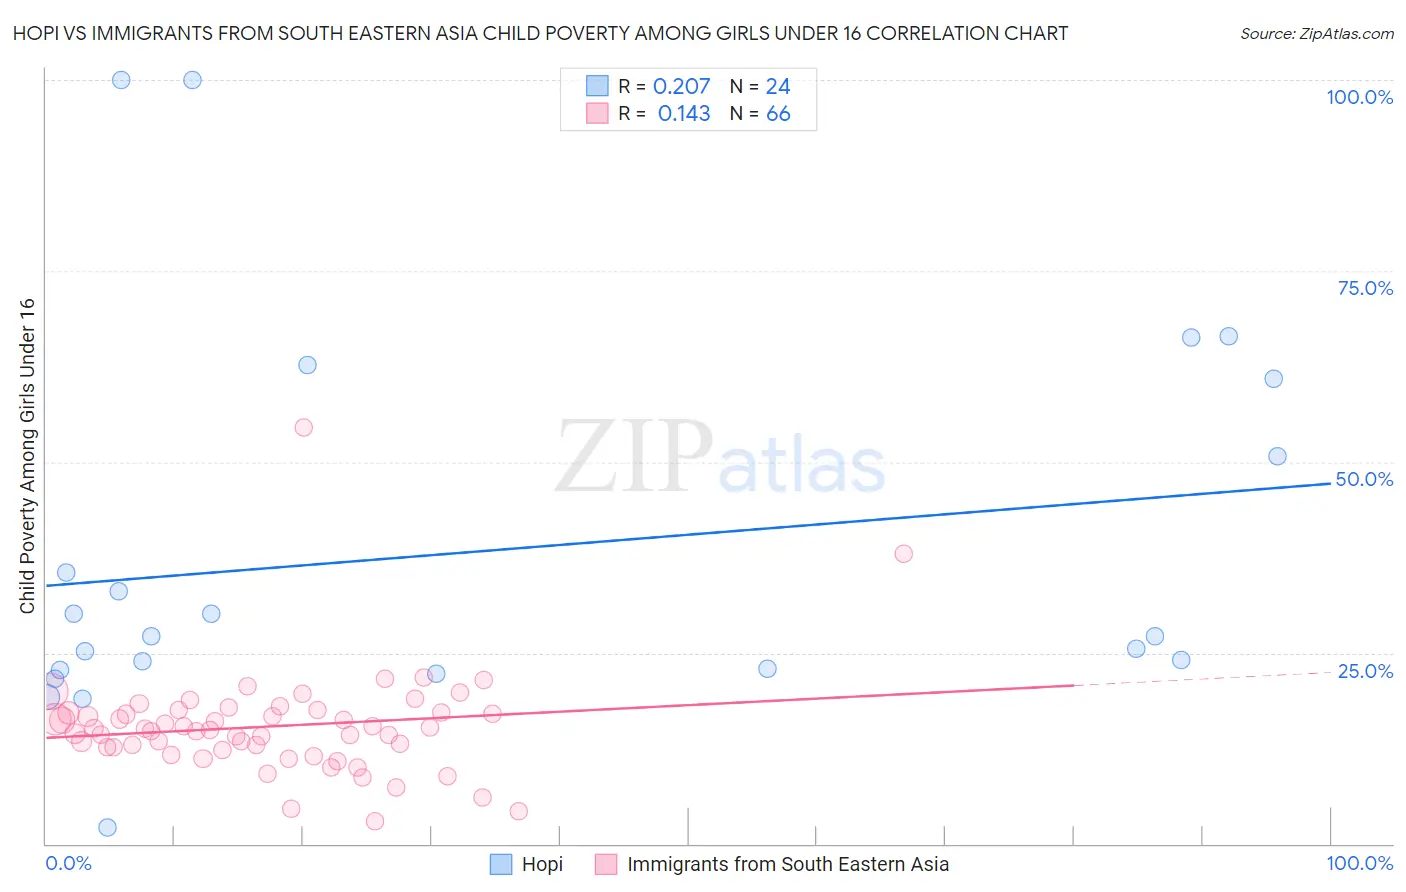 Hopi vs Immigrants from South Eastern Asia Child Poverty Among Girls Under 16